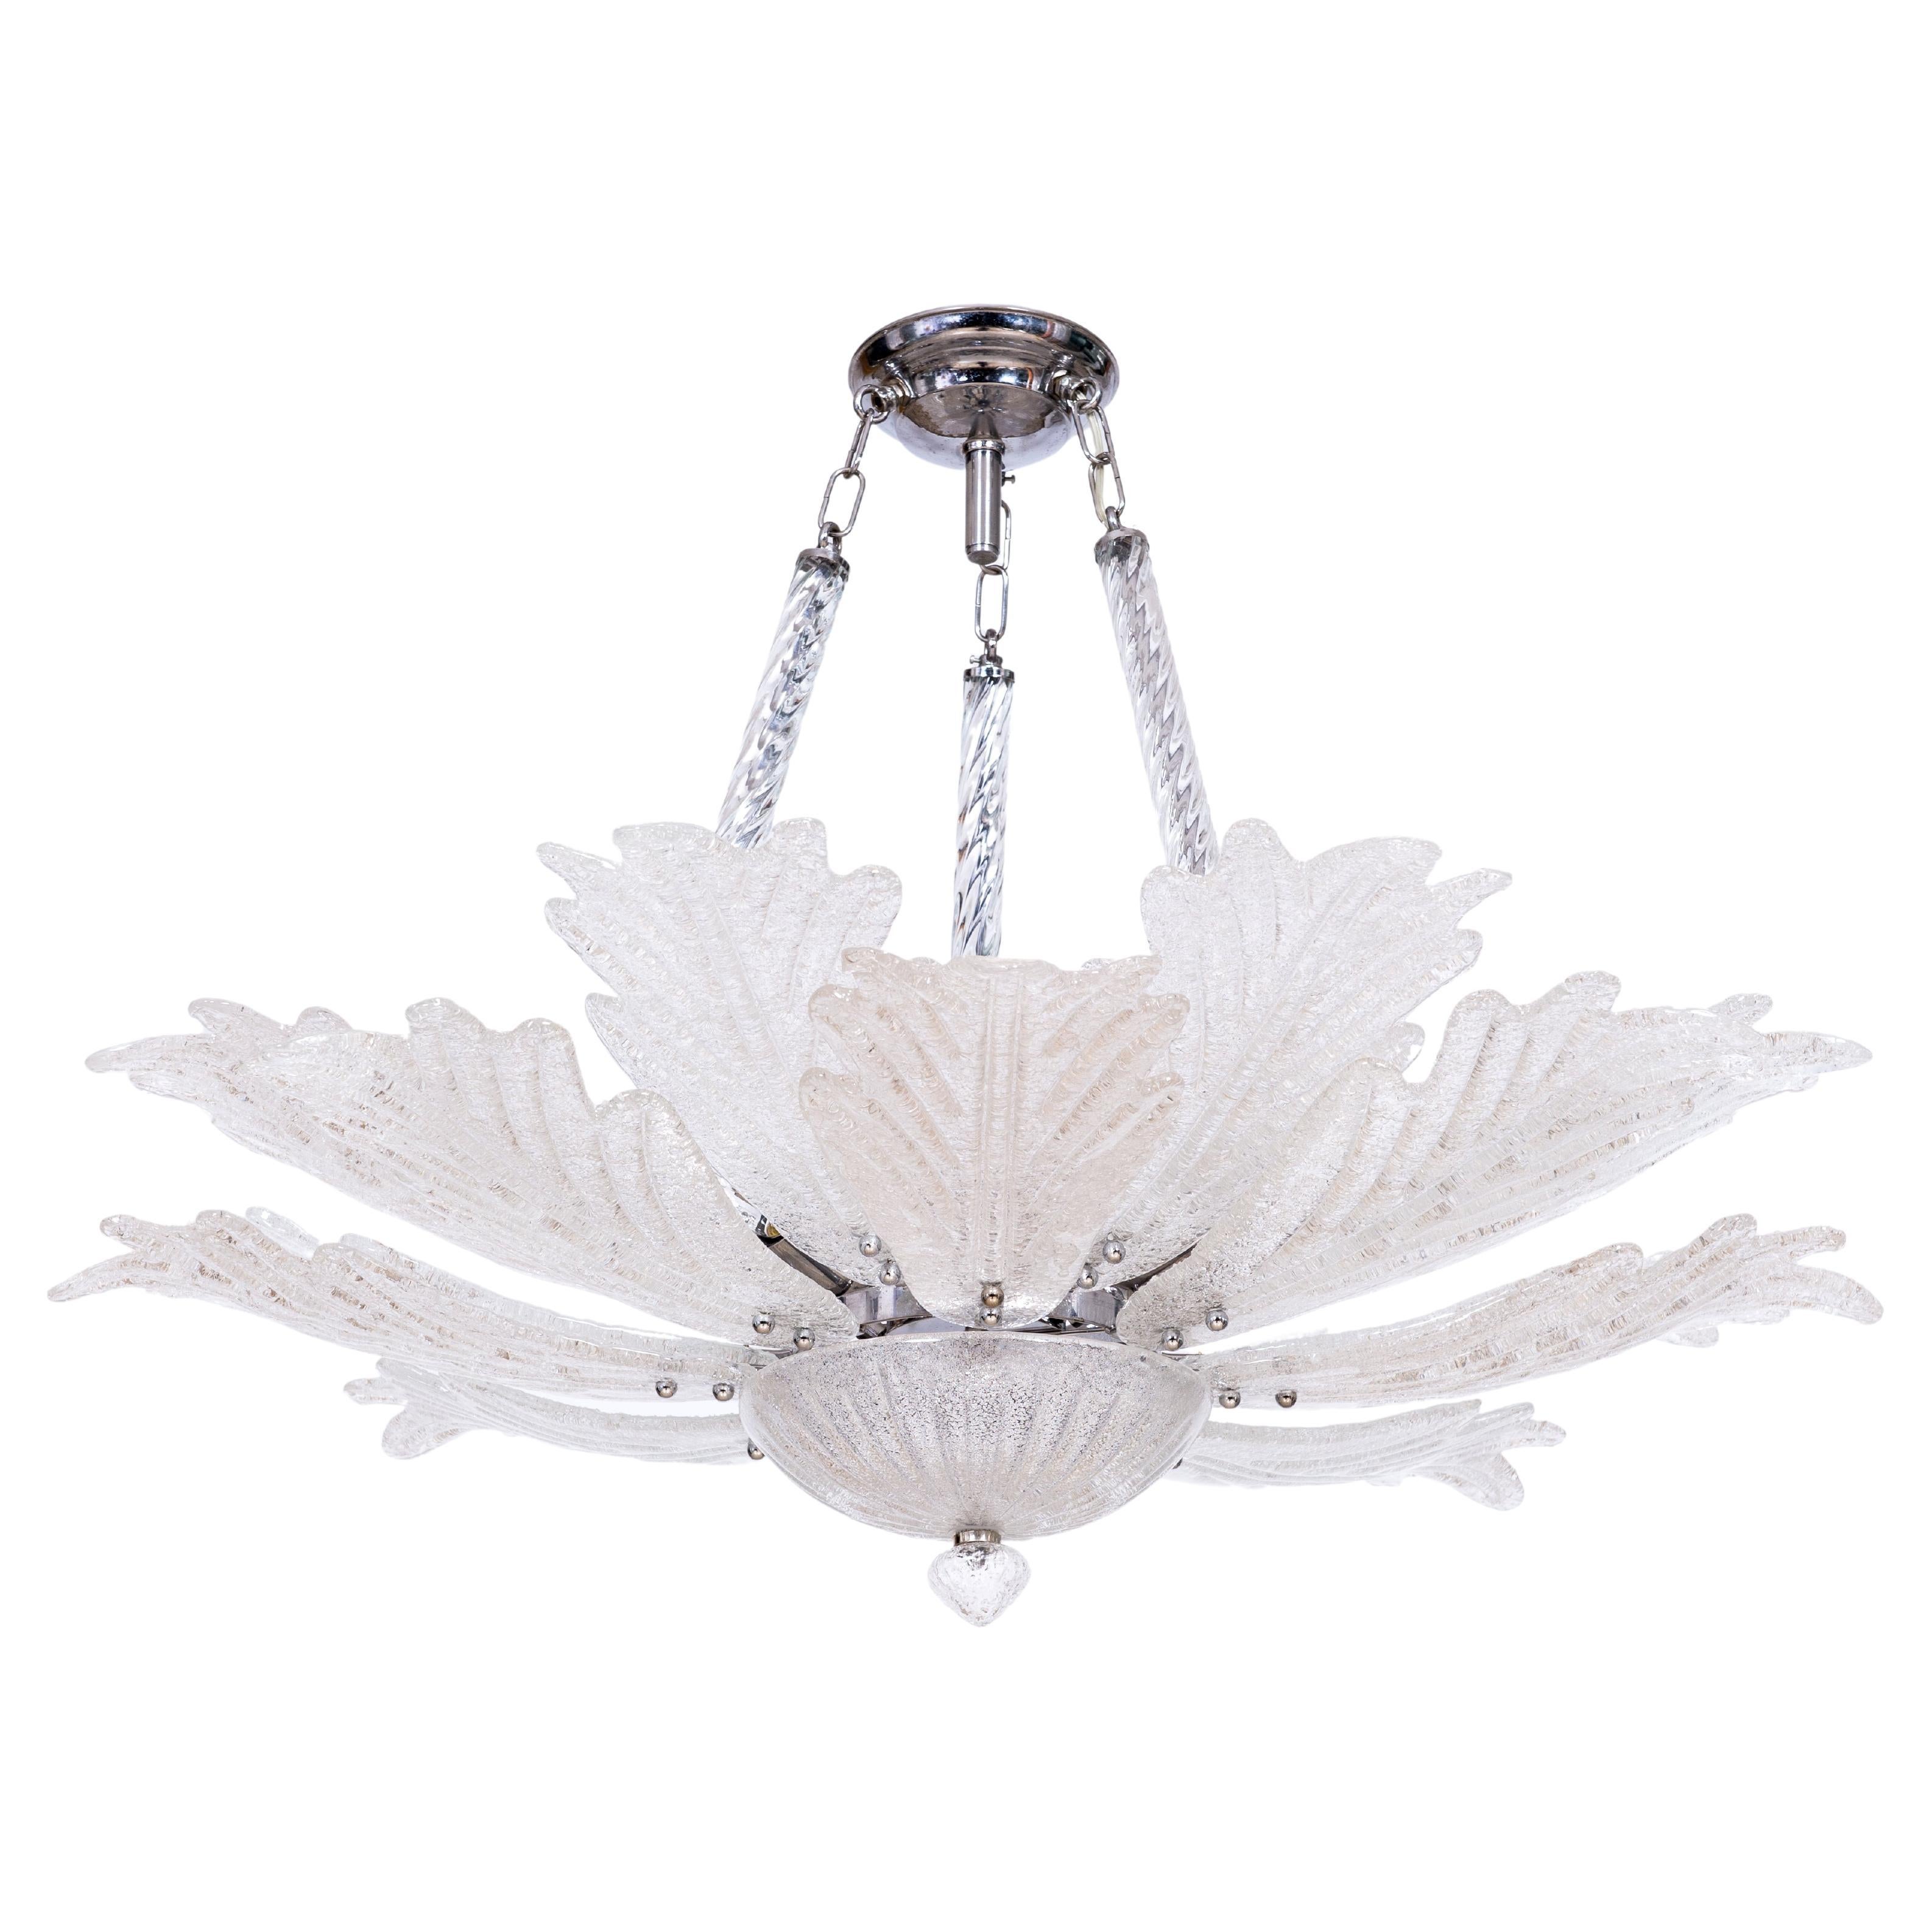 Grit Murano Glass Chandelier Attributed to Toso 1970s Venice Italy For Sale